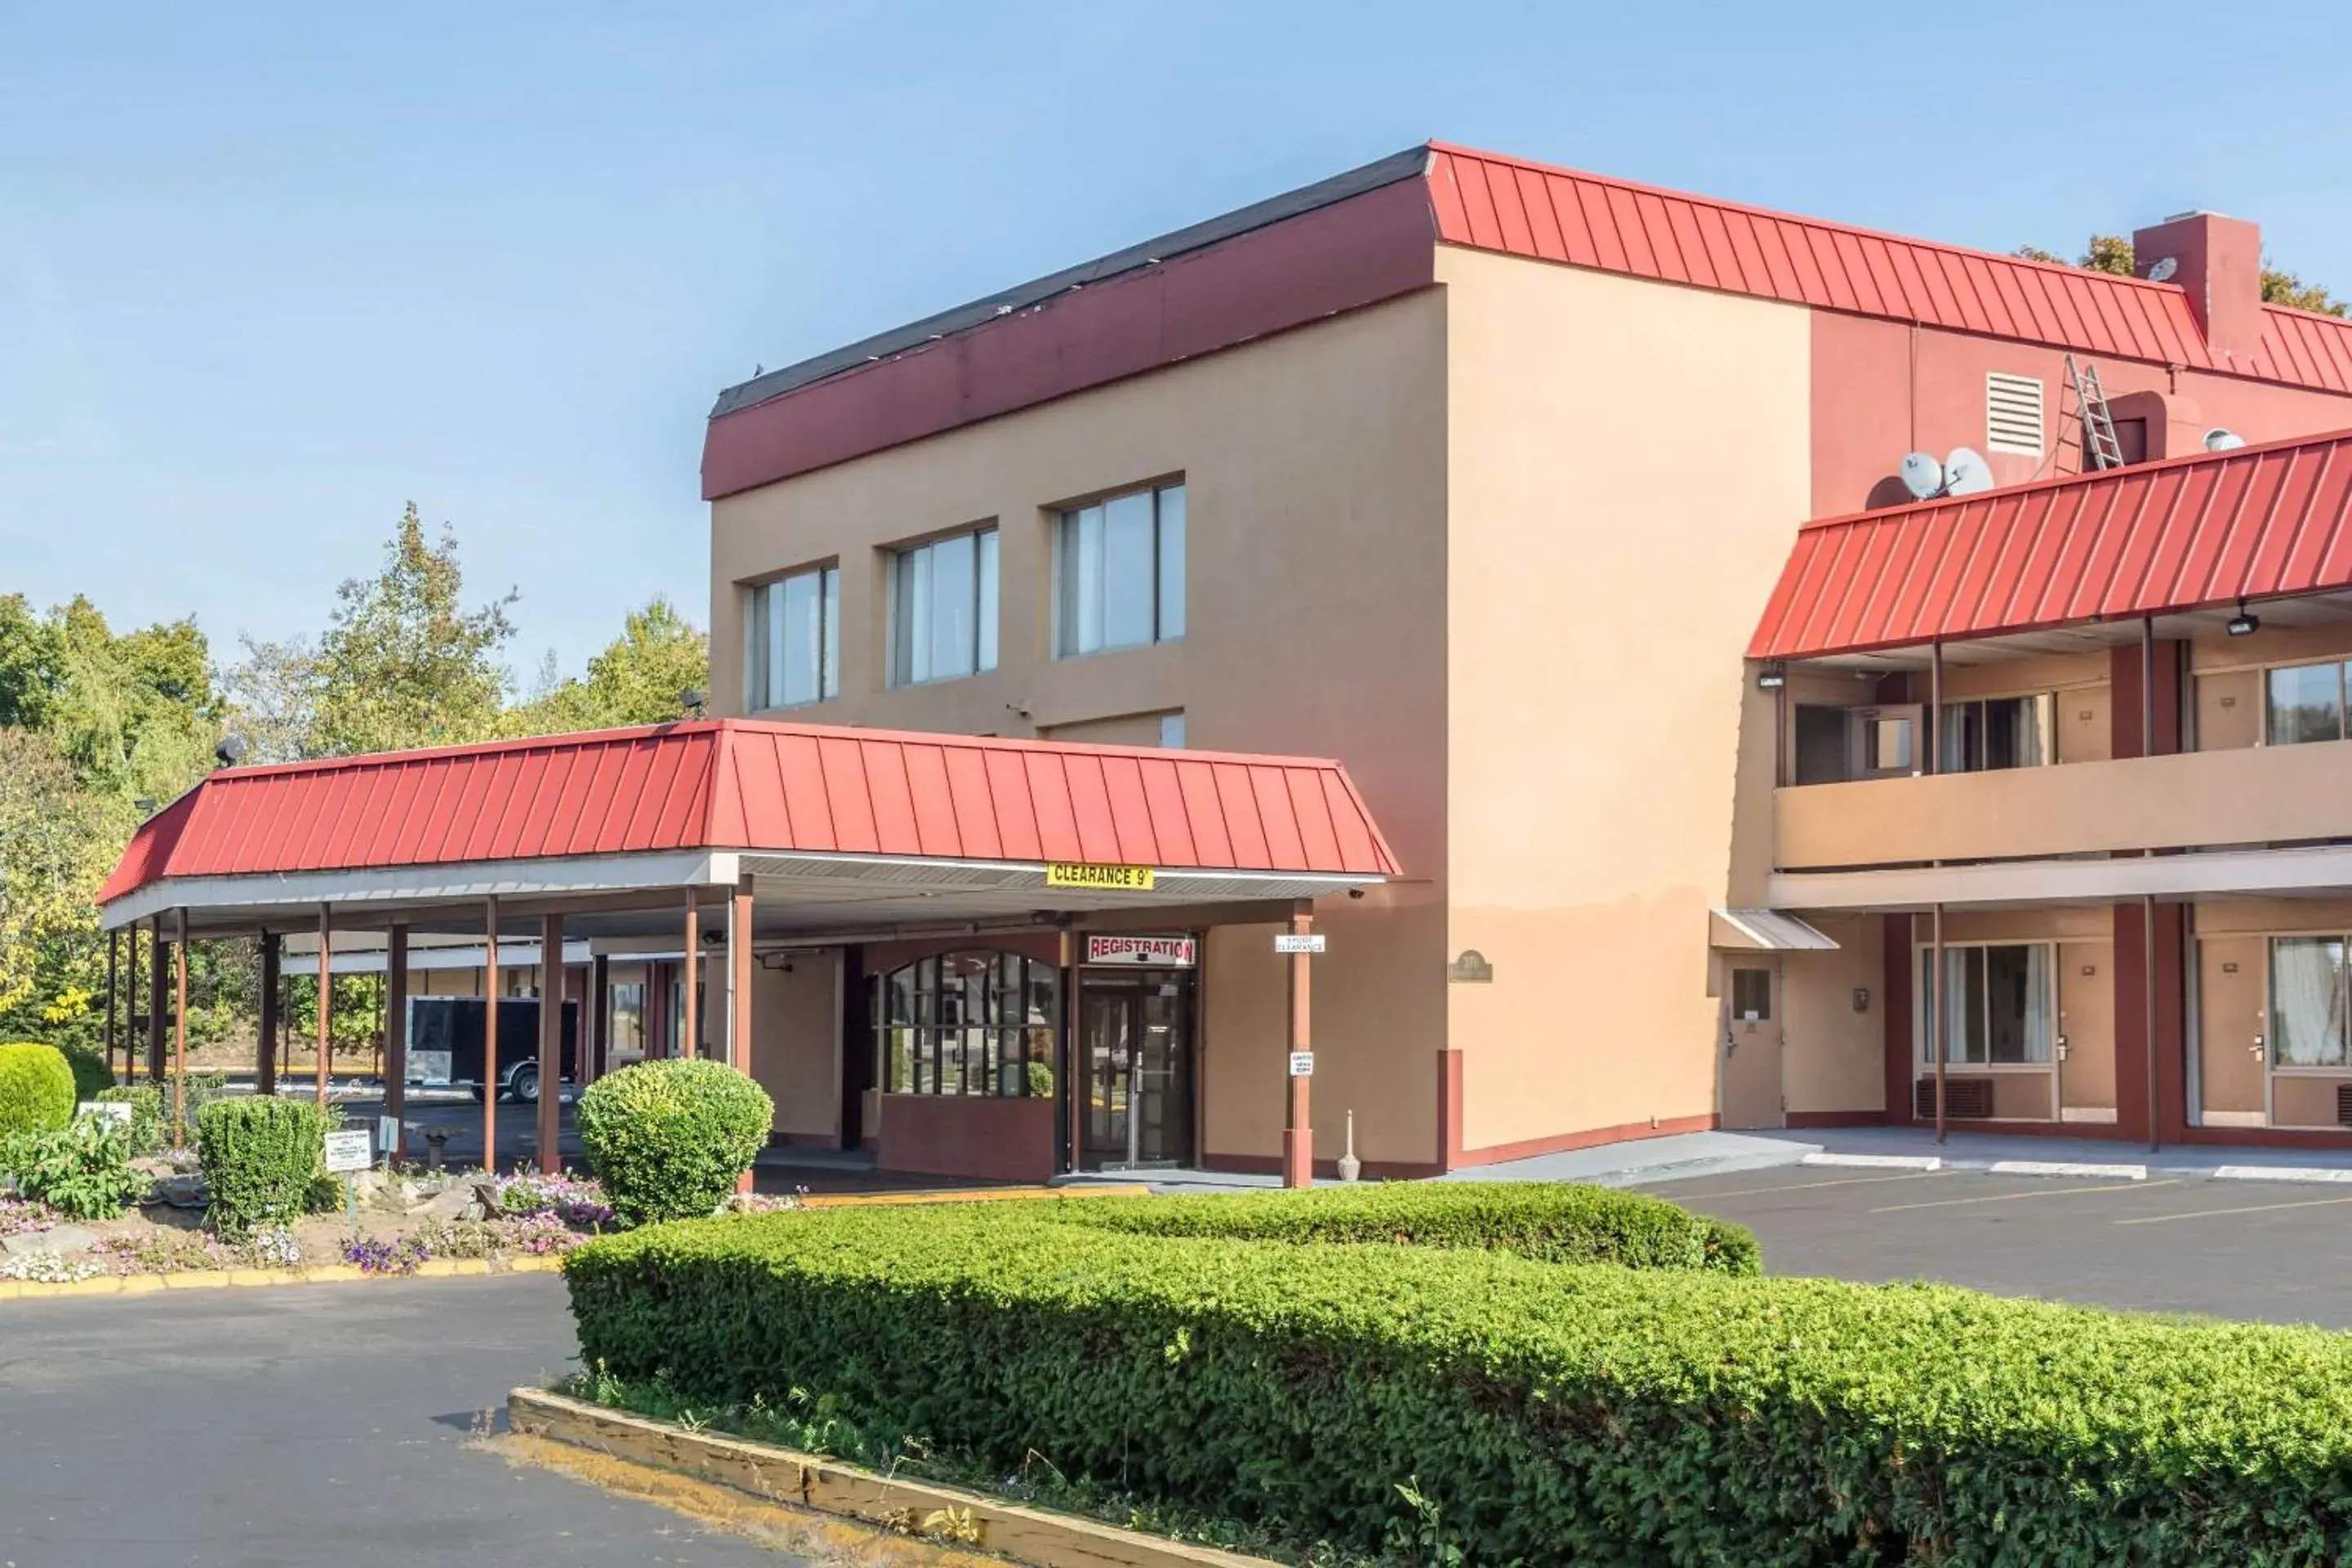 Property Building in Econo Lodge West Haven